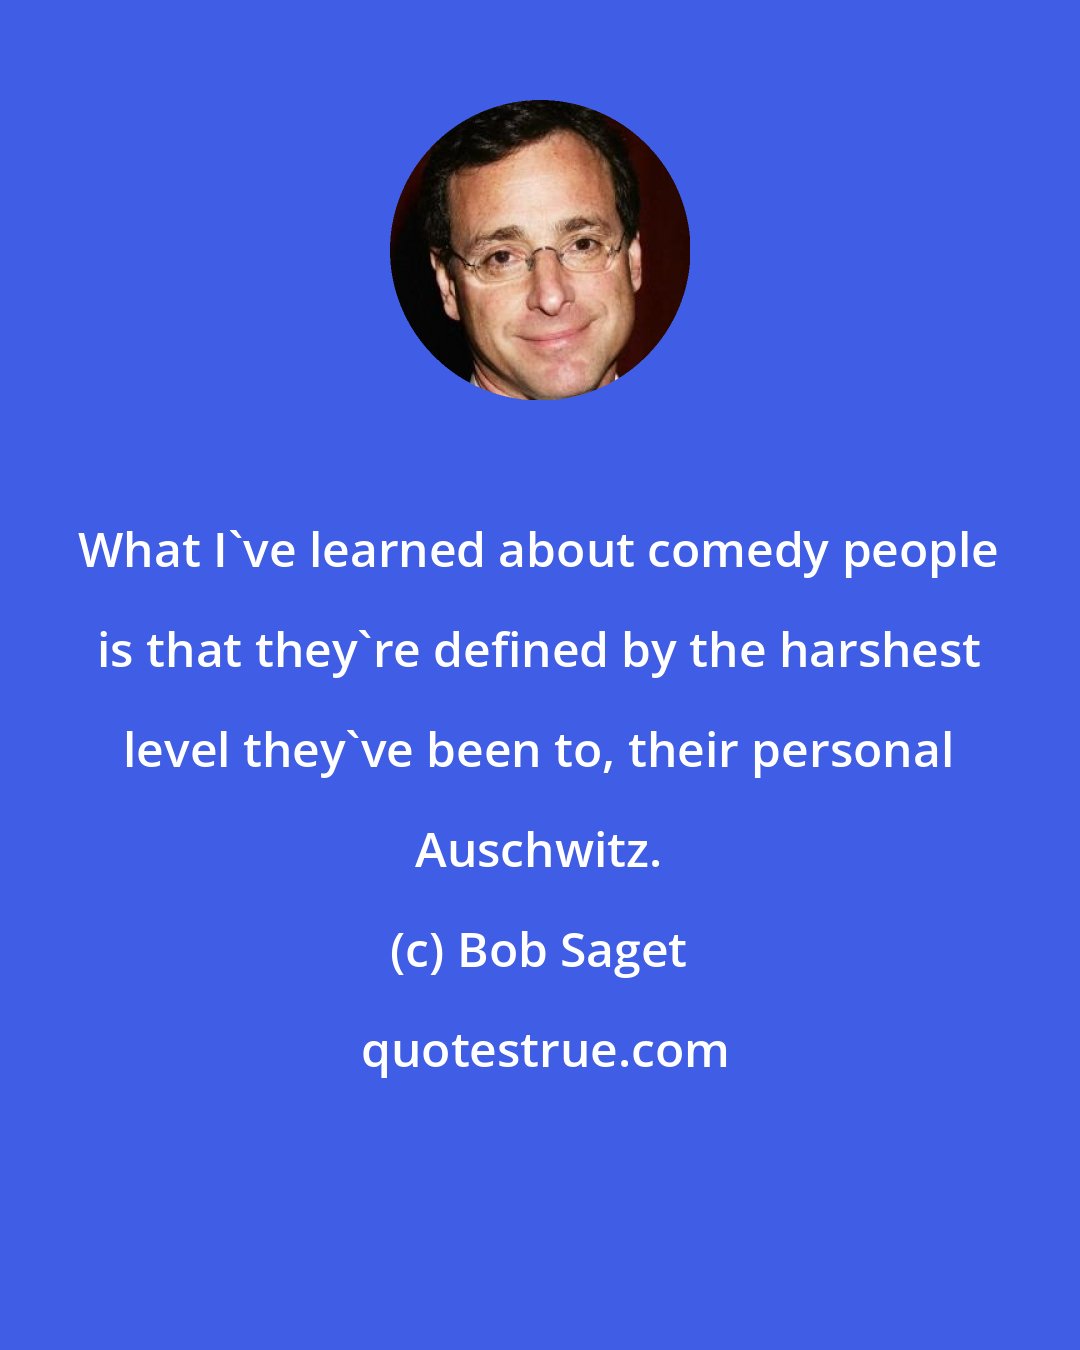 Bob Saget: What I've learned about comedy people is that they're defined by the harshest level they've been to, their personal Auschwitz.